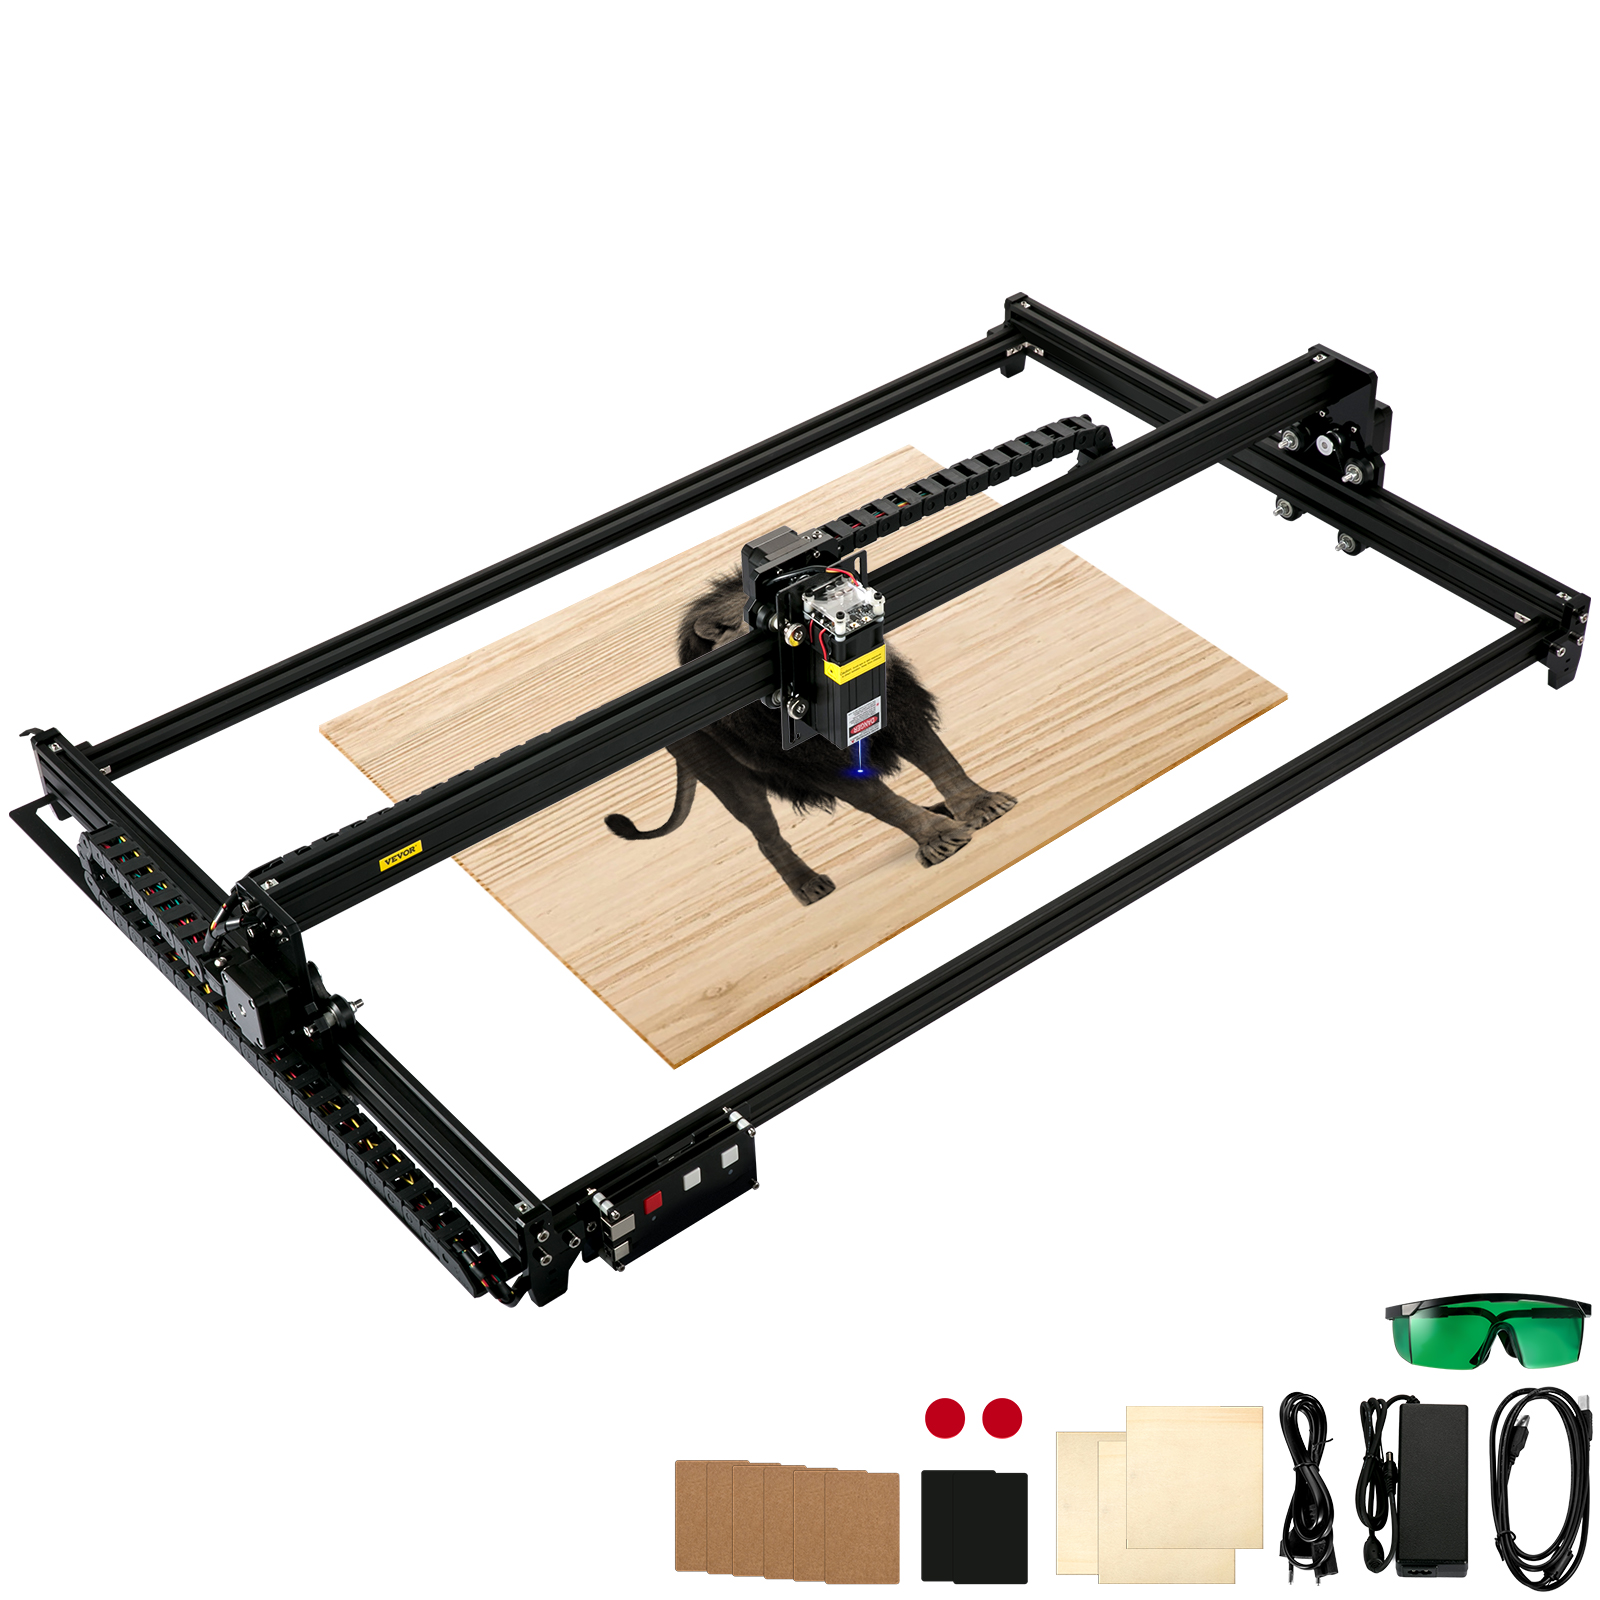 DIY CNC Laser Engraver Kits 4050 GRBL Control Wood Carving Engraving  Machine (Working Area 40x50cm, Axis (2500MW) 通販